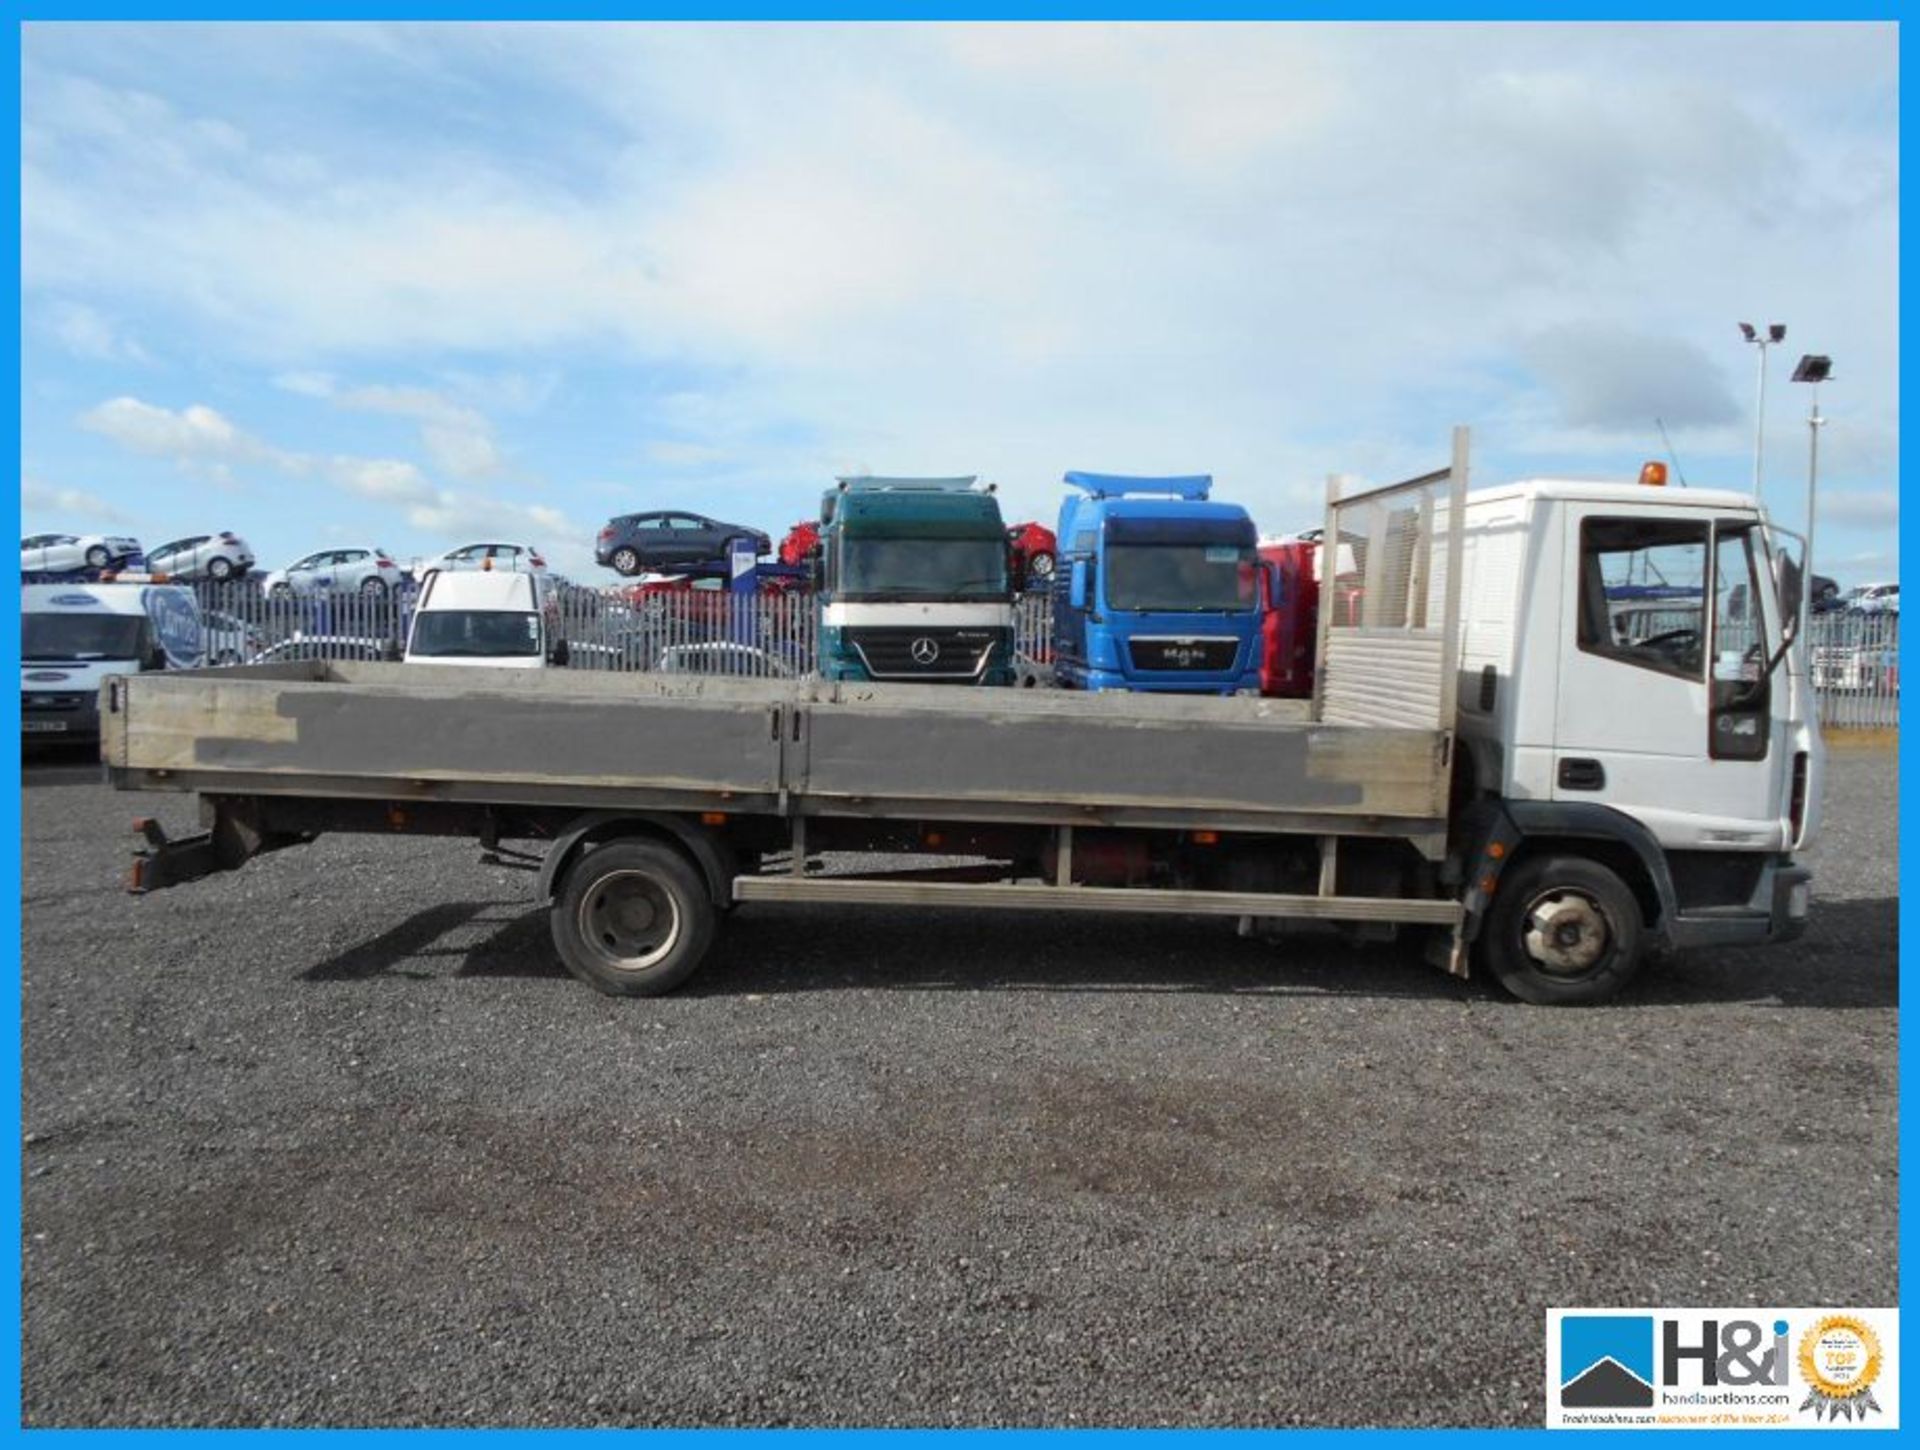 2005 '55' REG. IVECO FORD EURO CARGO 75E17. 20ft ALLOY DROPSIDE BODY. 566,500km. 2 OWNERS. MANUAL - Image 11 of 12